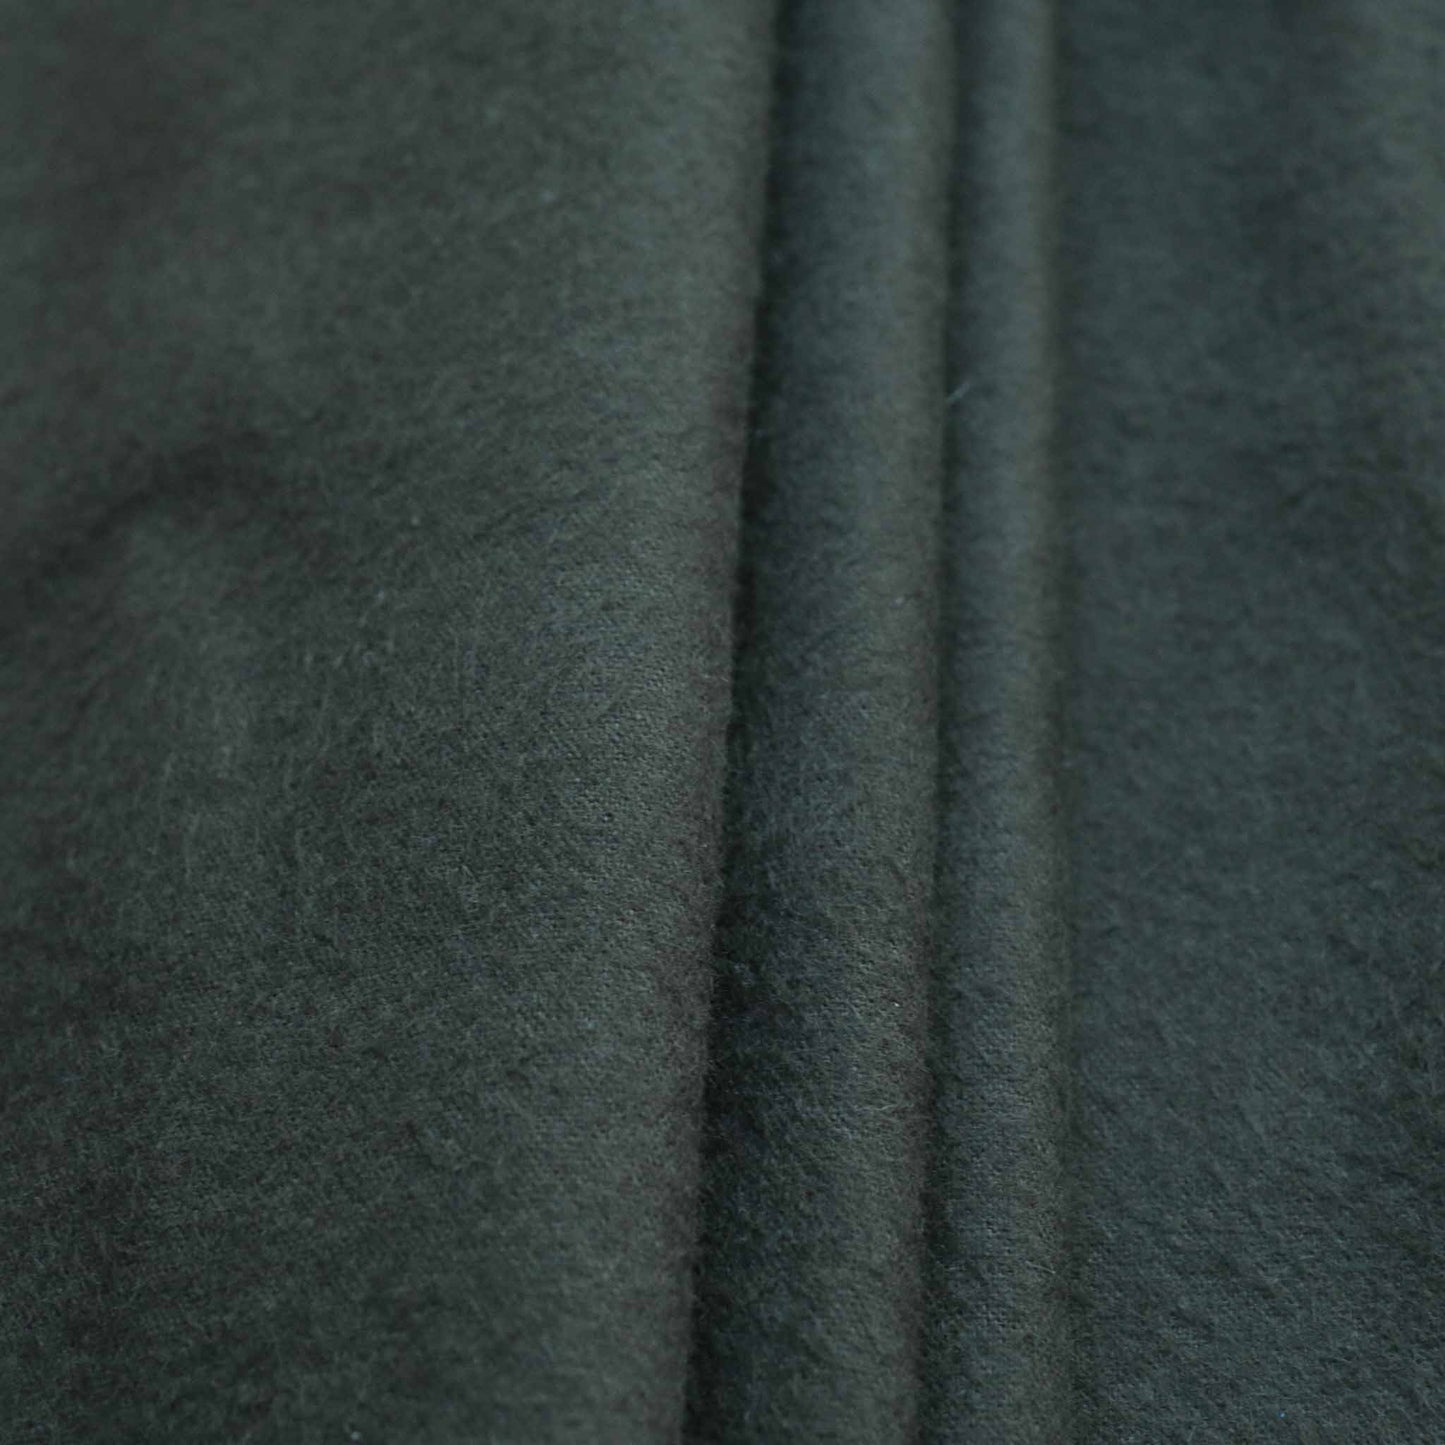 folded brushed cotton dressmaking fabric in dark green colour